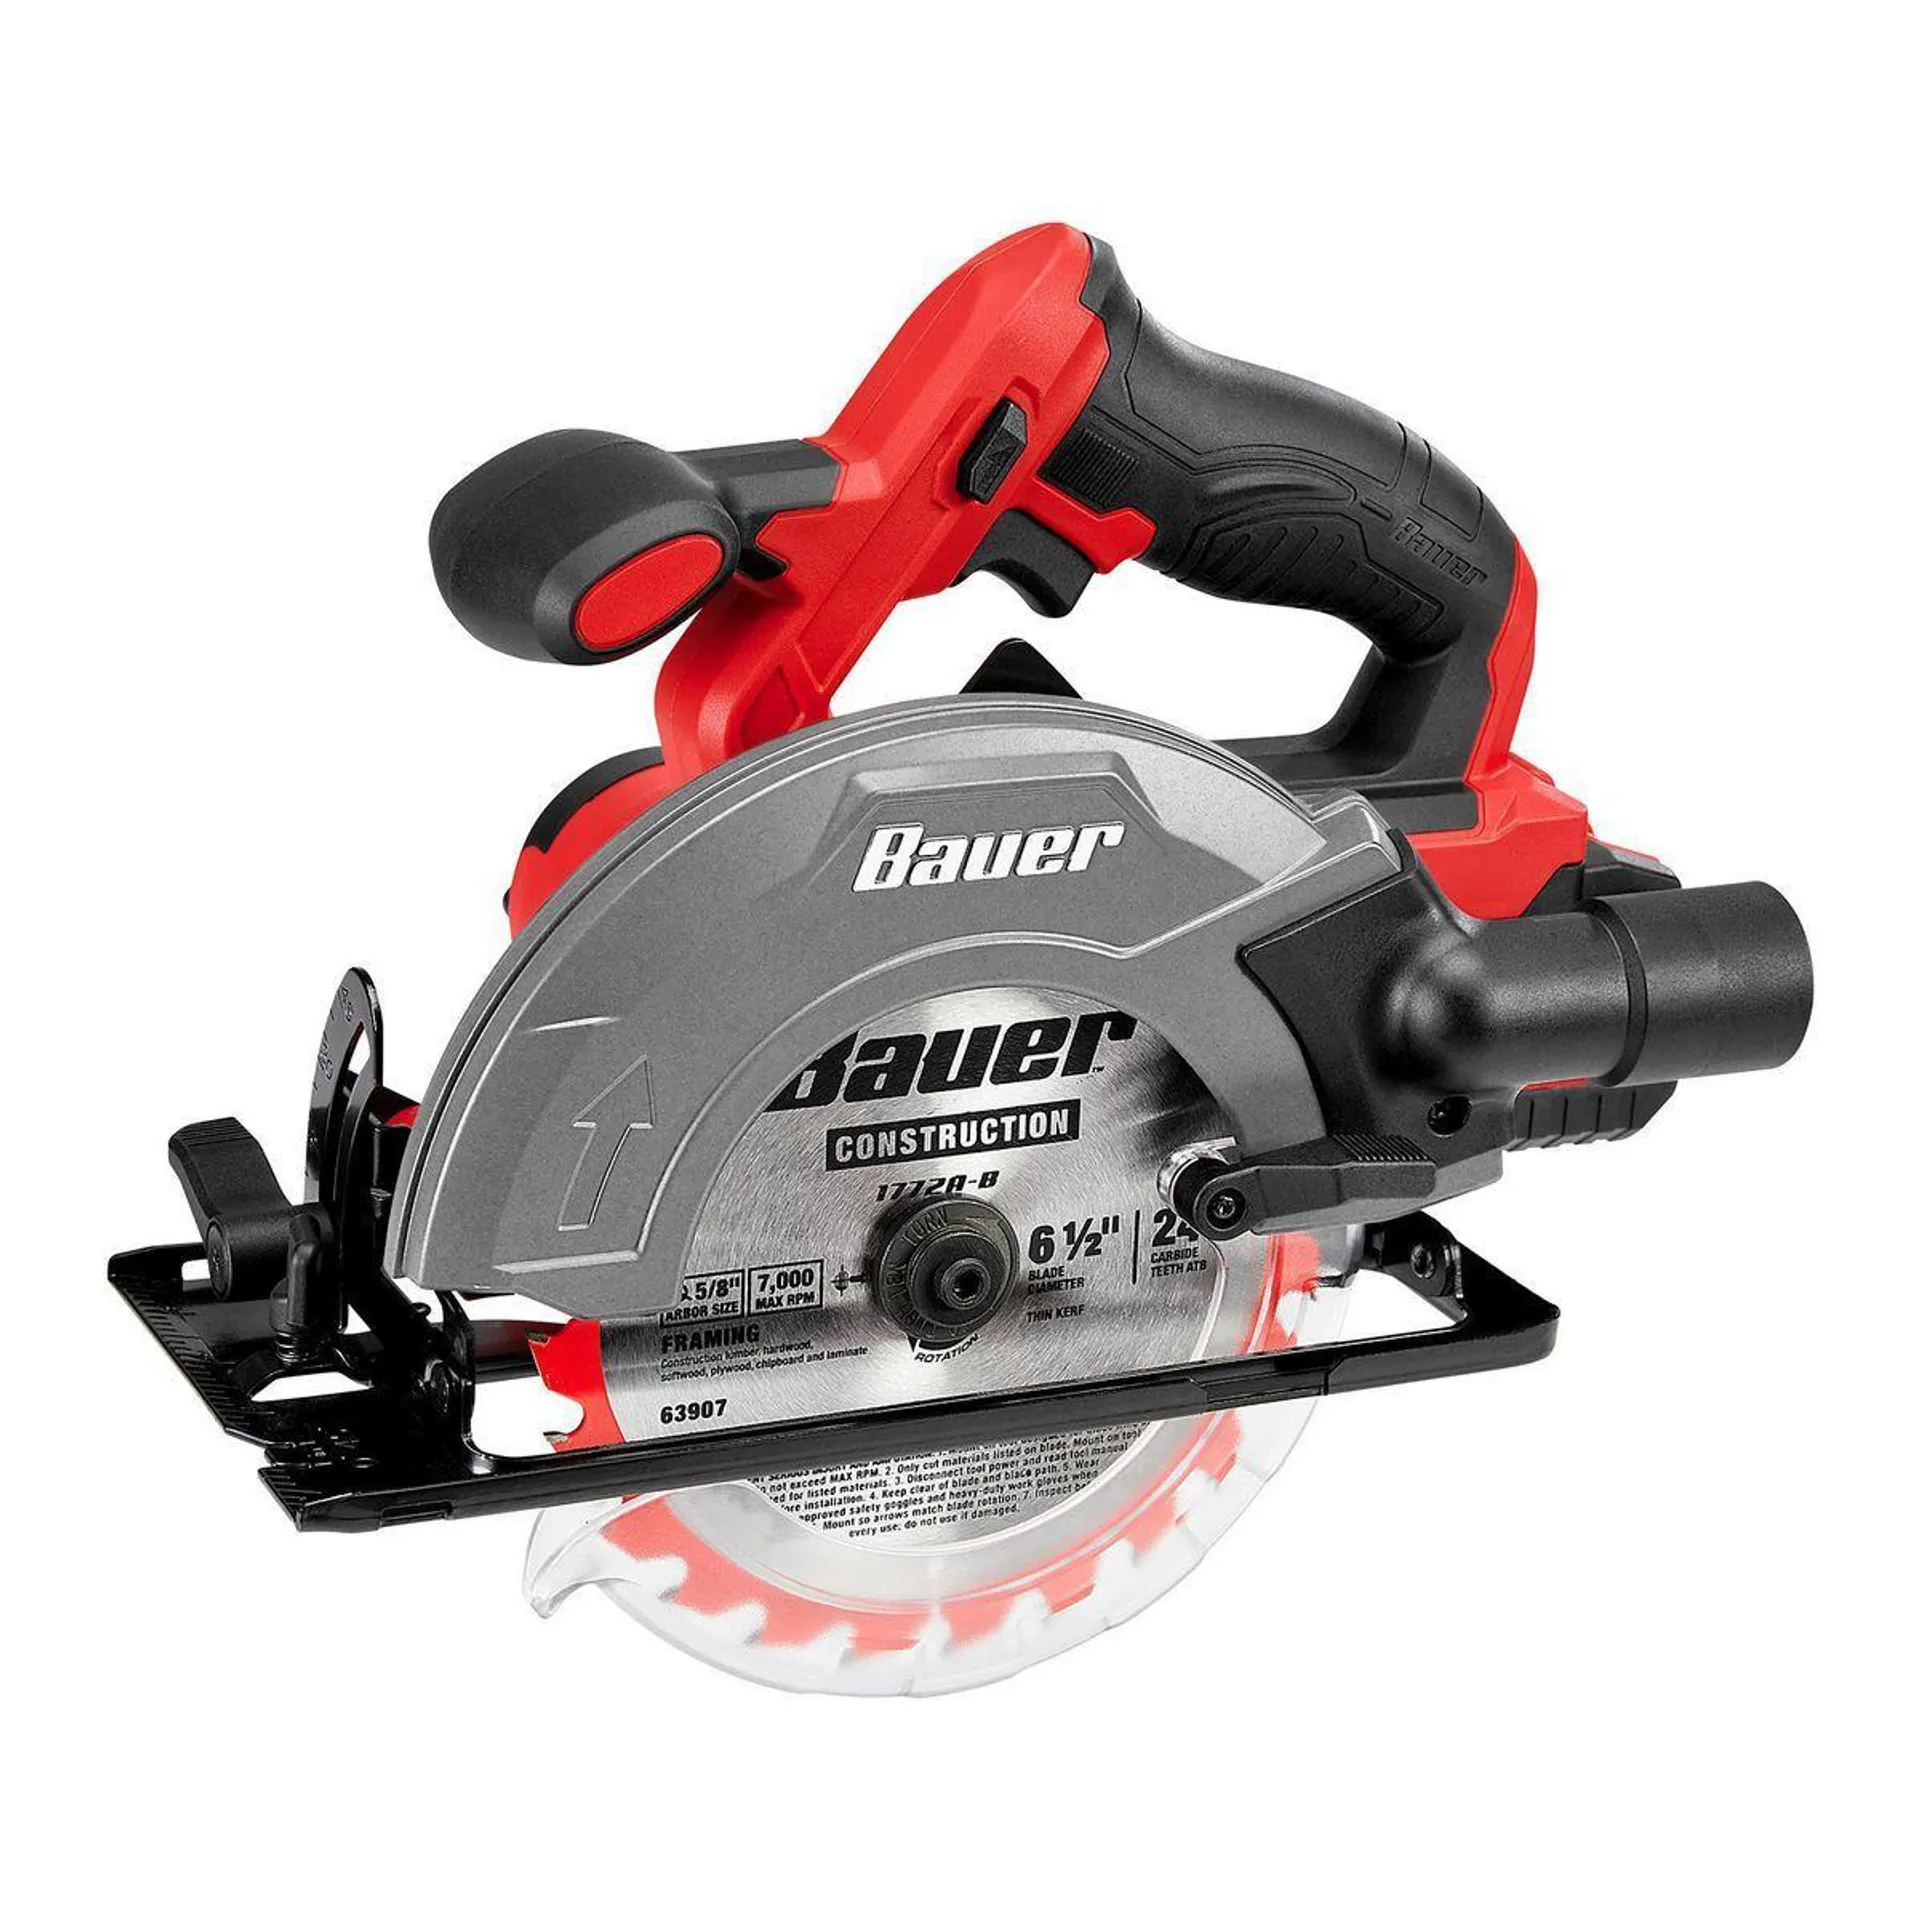 BAUER 20V Cordless 6-1/2 in. Circular Saw - Tool Only